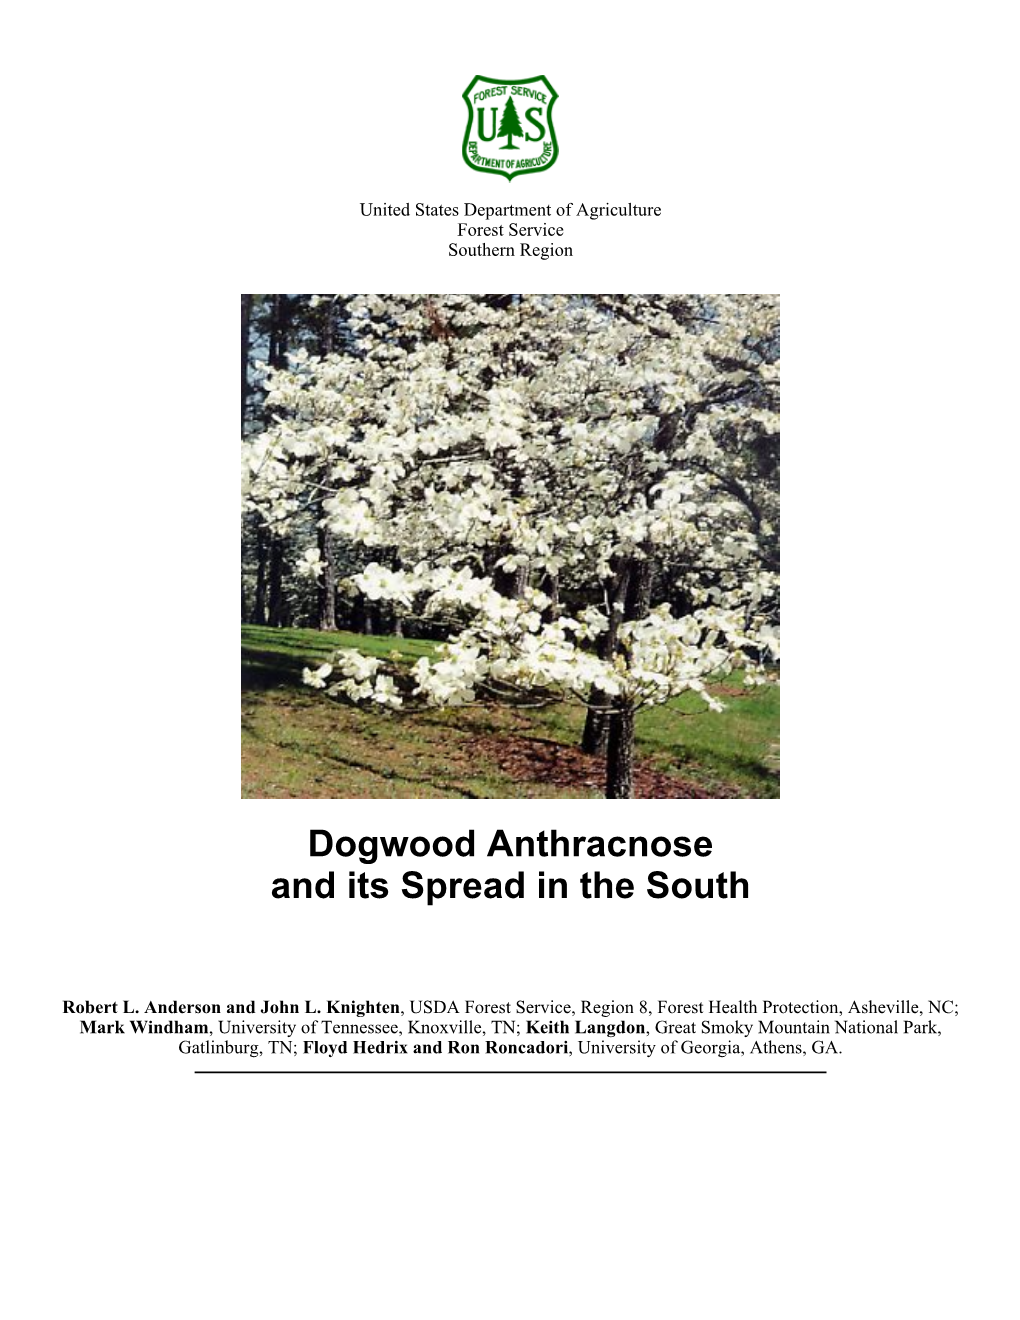 Dogwood Anthracnose and Its Spread in the South